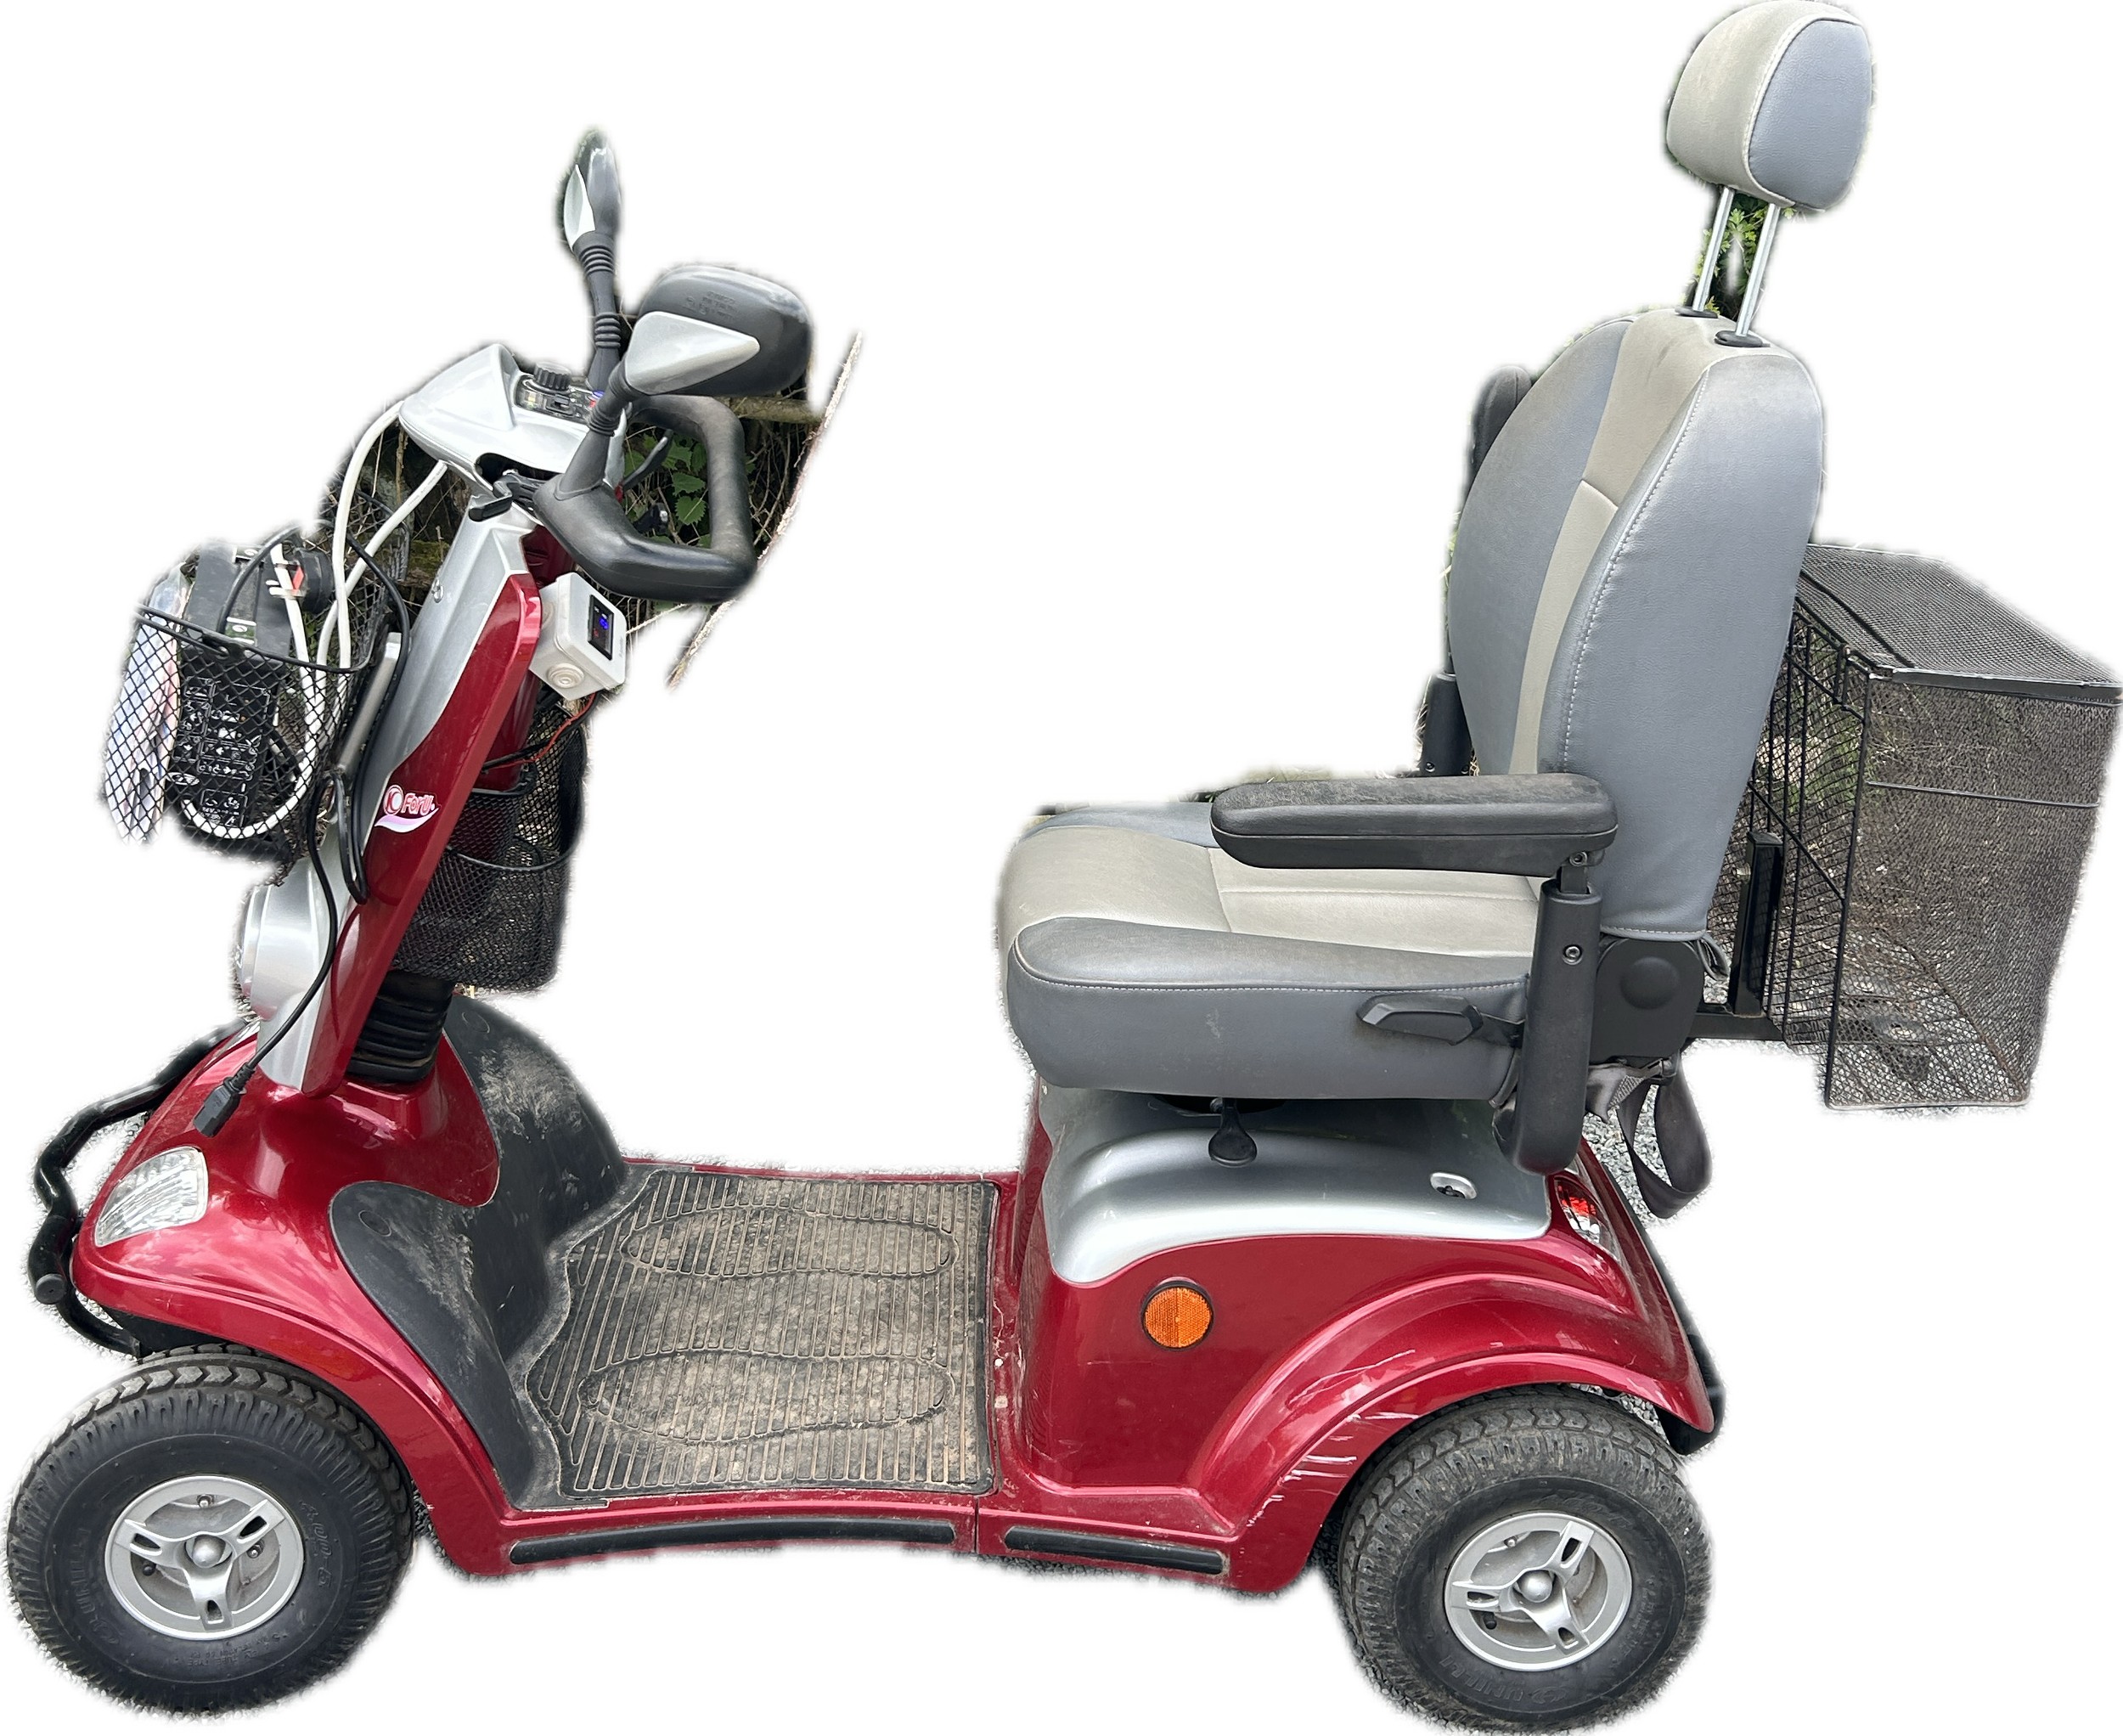 Kymco For U Mobility scooter in working order with key, charger